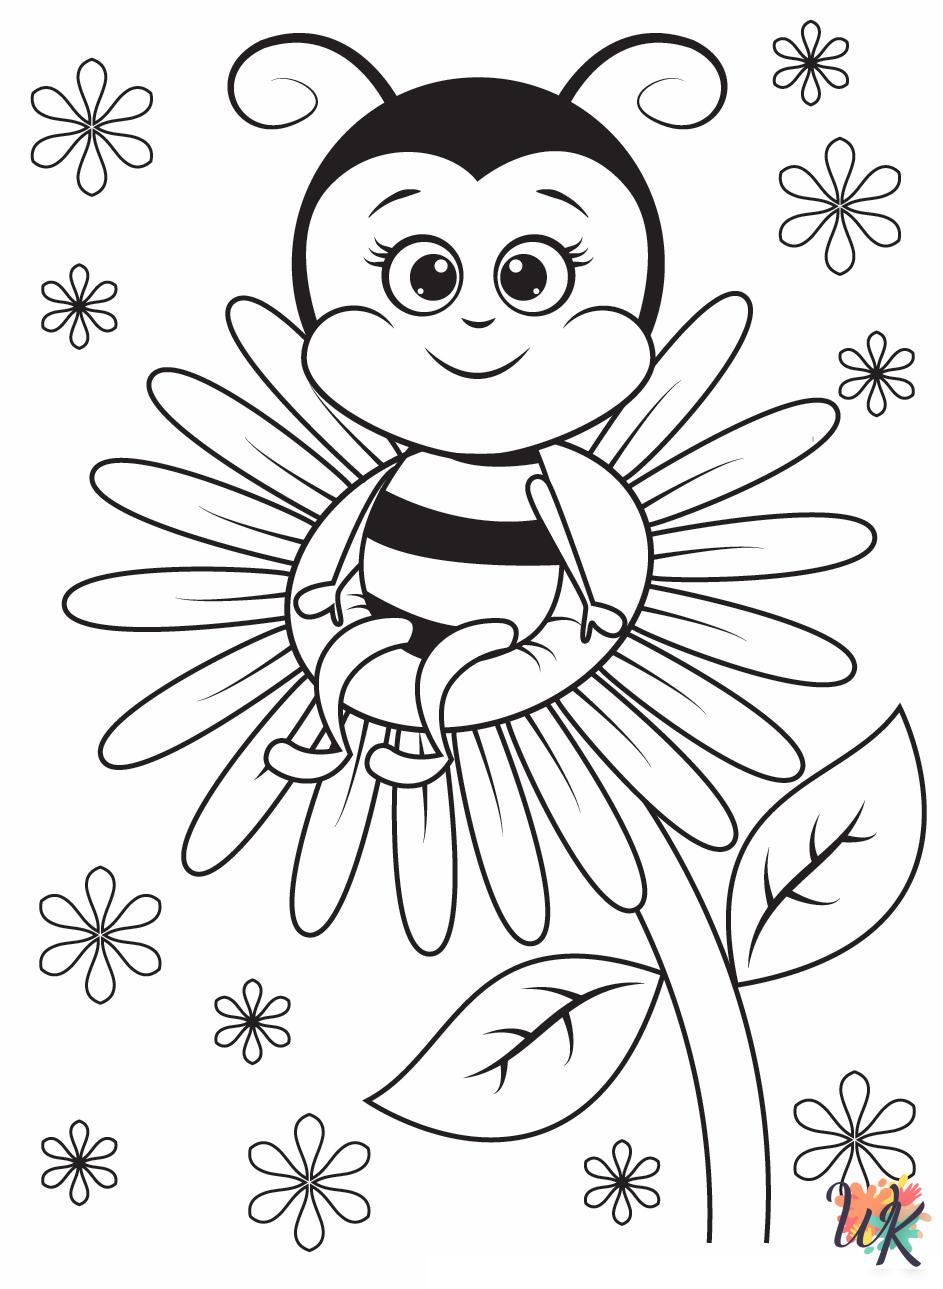 Bee coloring pages for adults